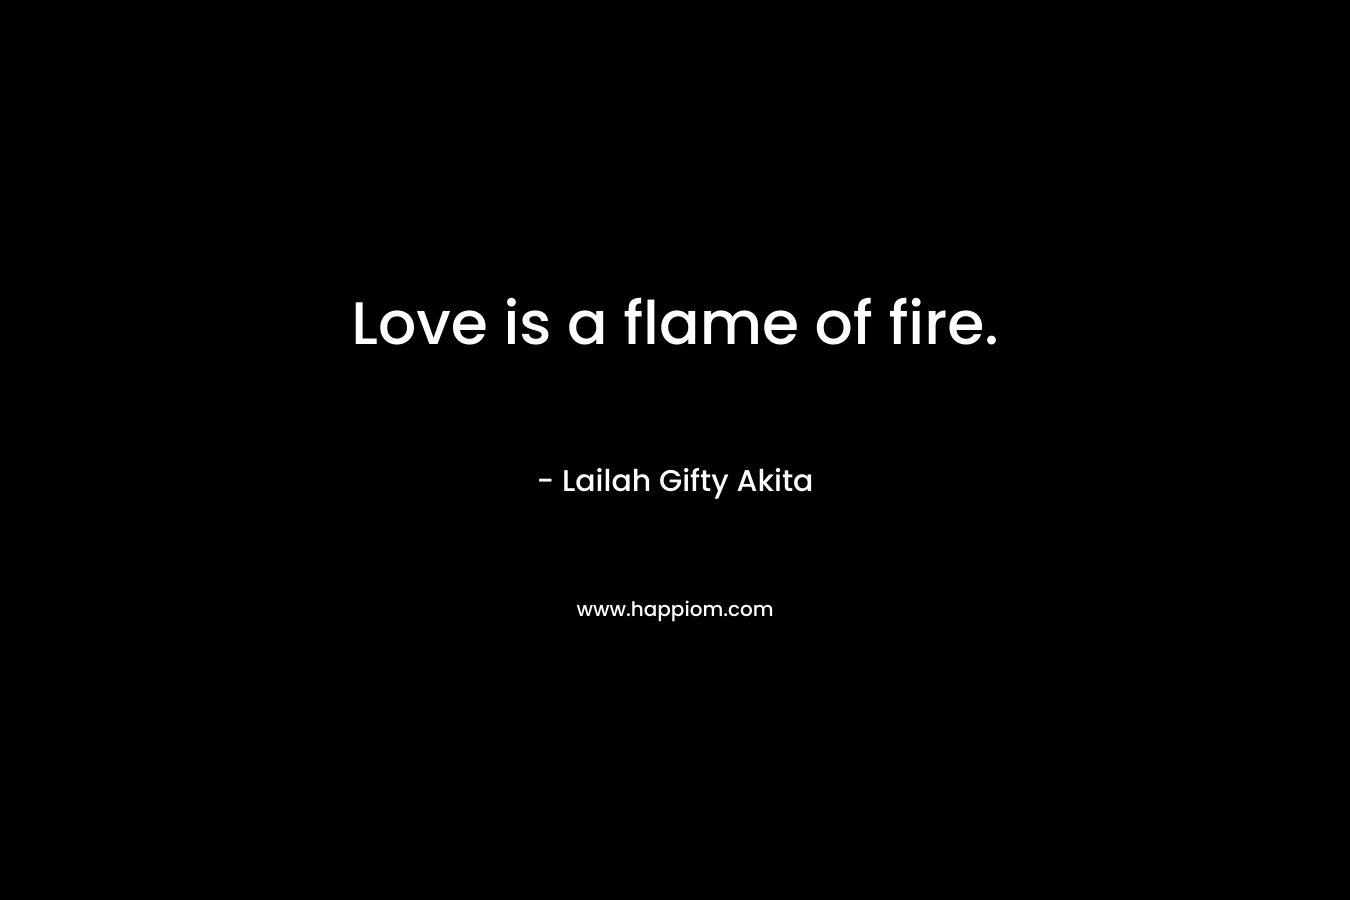 Love is a flame of fire.